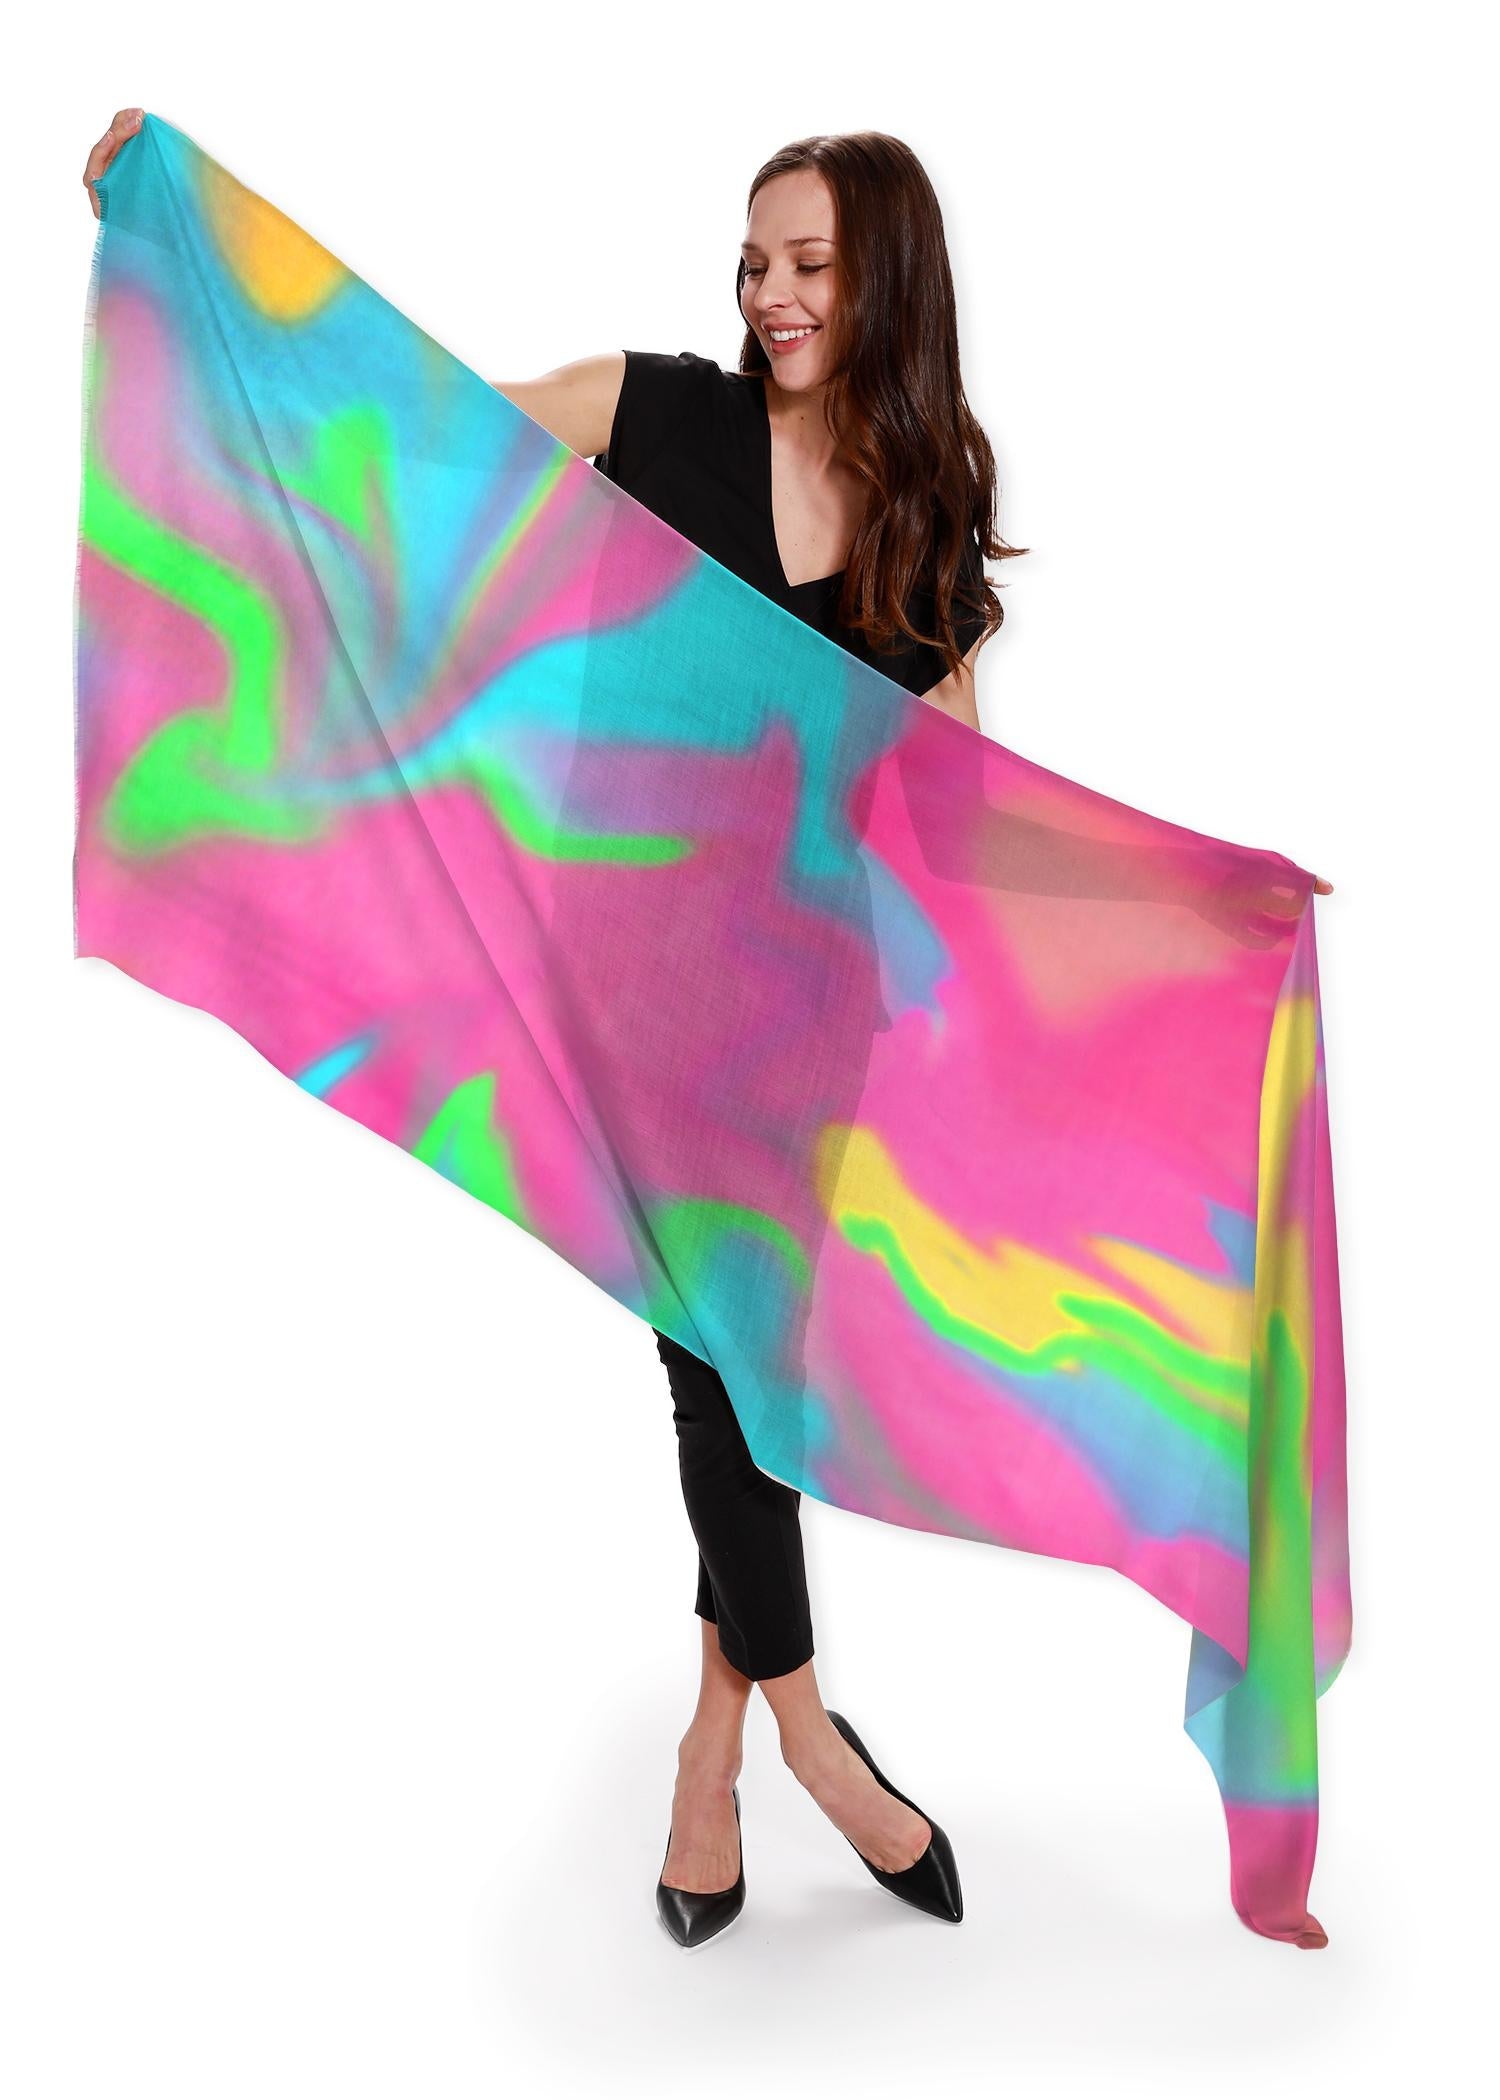 Large luxury sheer cashmere silk Scarf light weight wrap Plus size cover up top designer Barbie™ rainbow resort wear direct from Designer